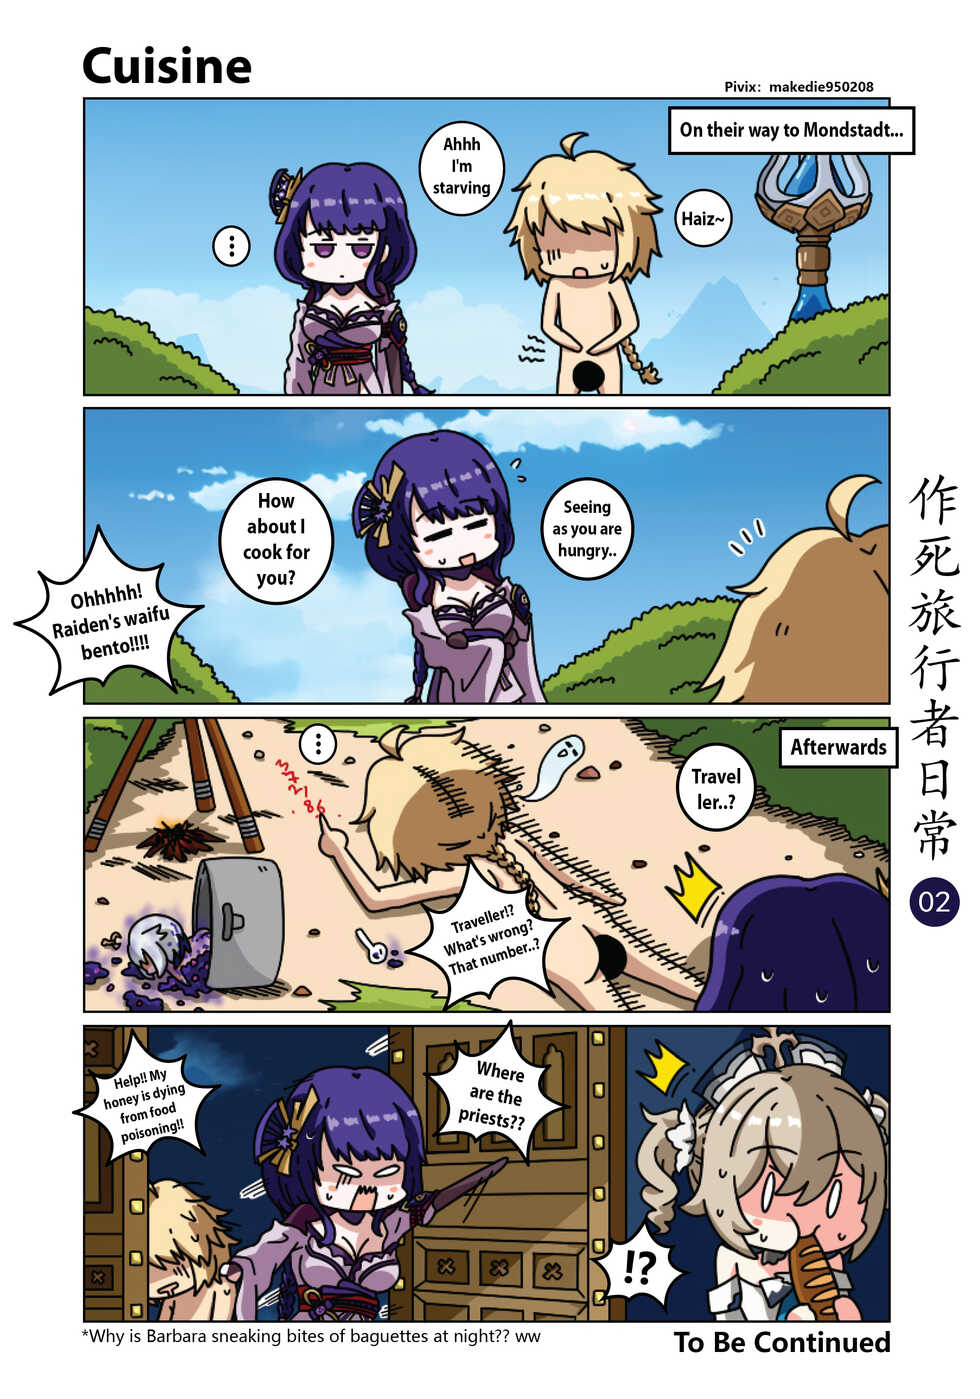 Makedie traveler daily life - Page 2